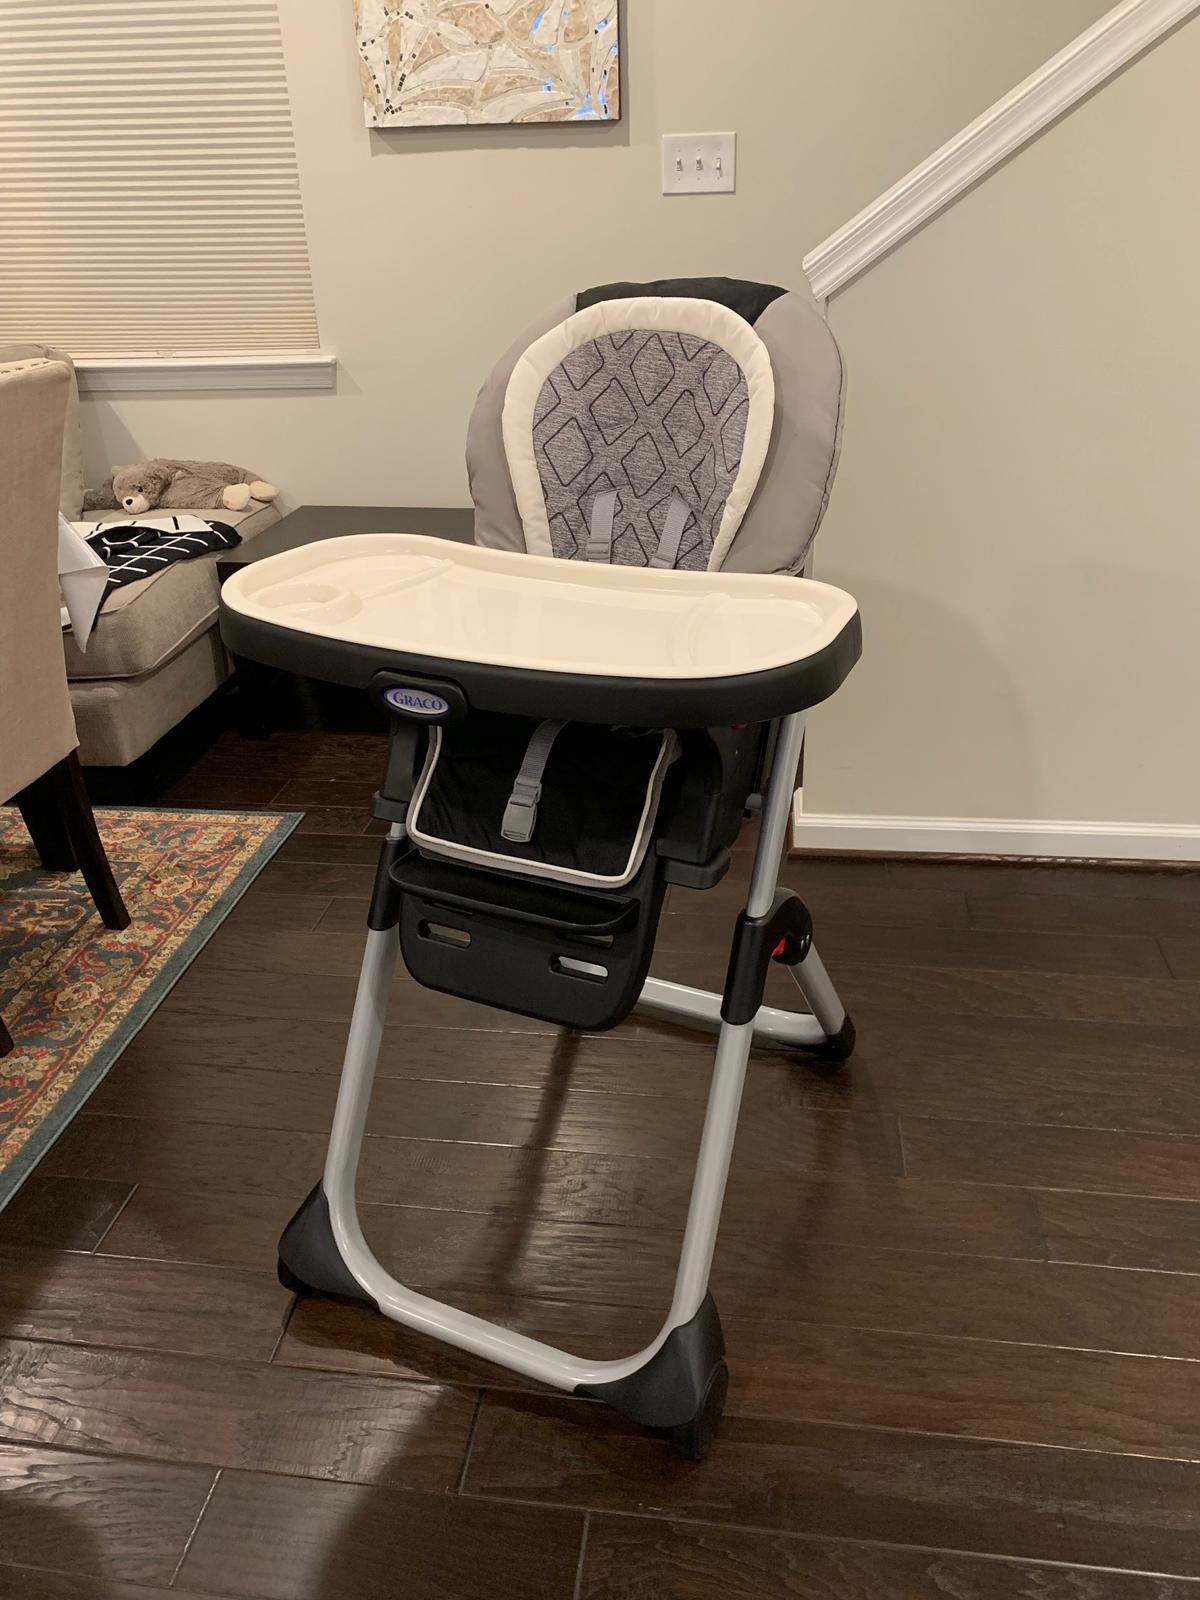 Graco Duodiner 3-in-1 highchair